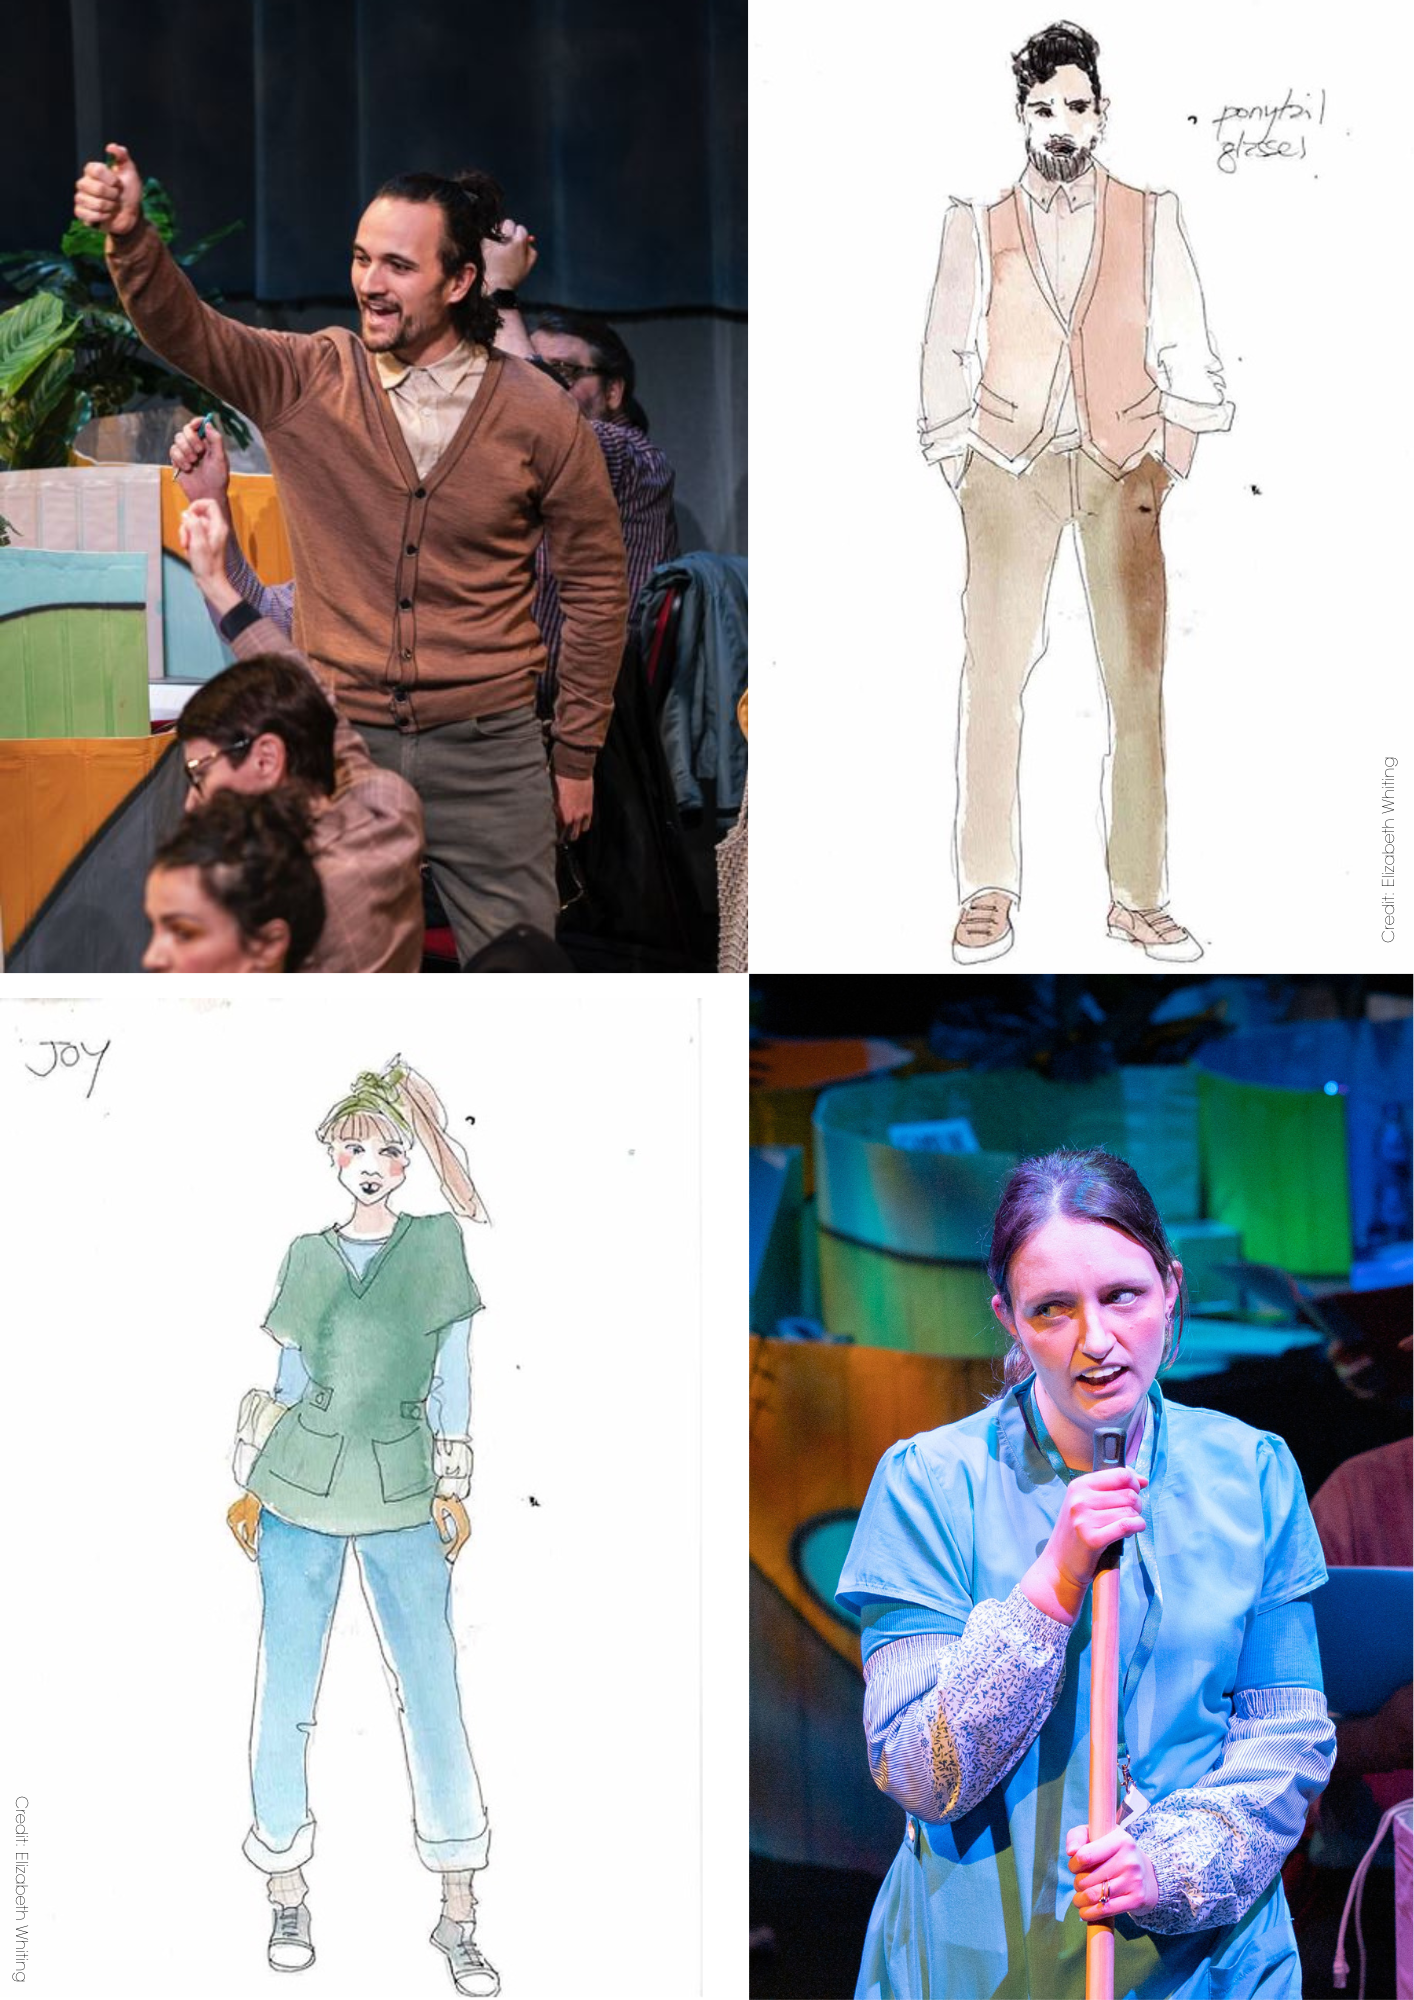 Group of photos of Neil & Joy from Dirty Work, along with drawings of their costume ideas